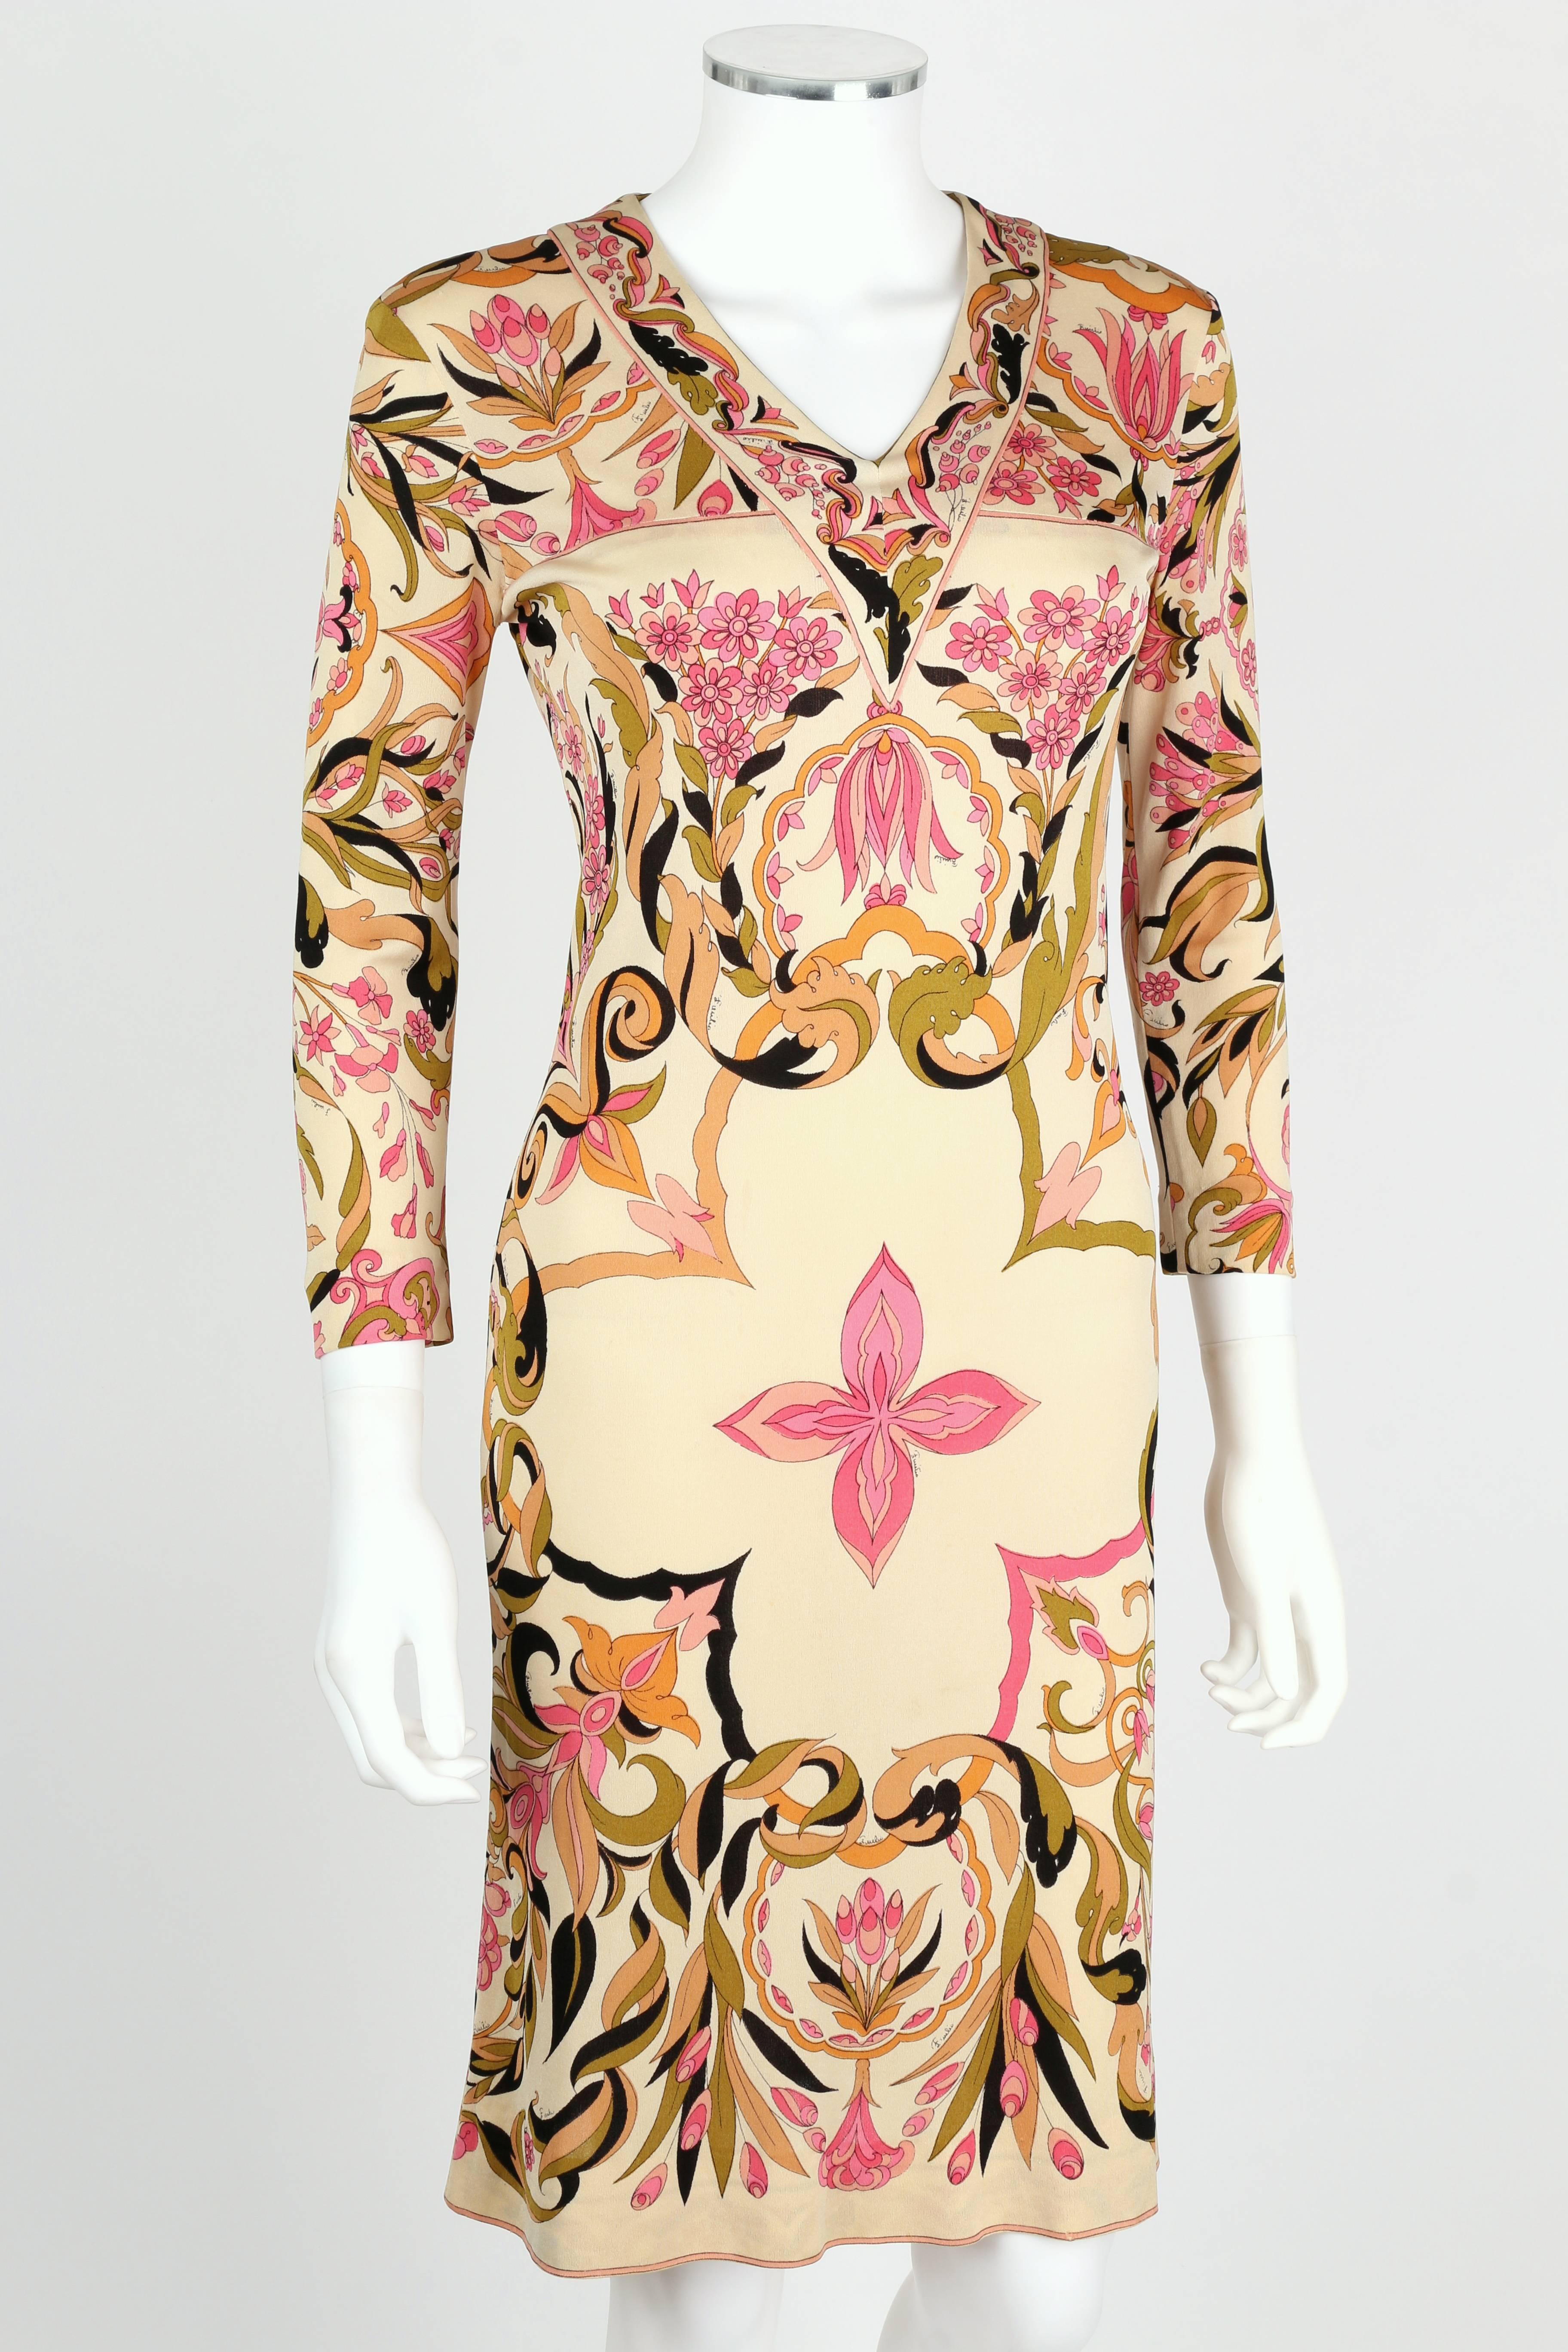 Vintage c.1960's Emilio Pucci off white silk jersey sheath dress. Kaleidoscope multicolor floral motif. V-neckline with decorative border detail. 3/4 length sleeves. Above the knee length. Slip-on style. Marked Fabric Content:  